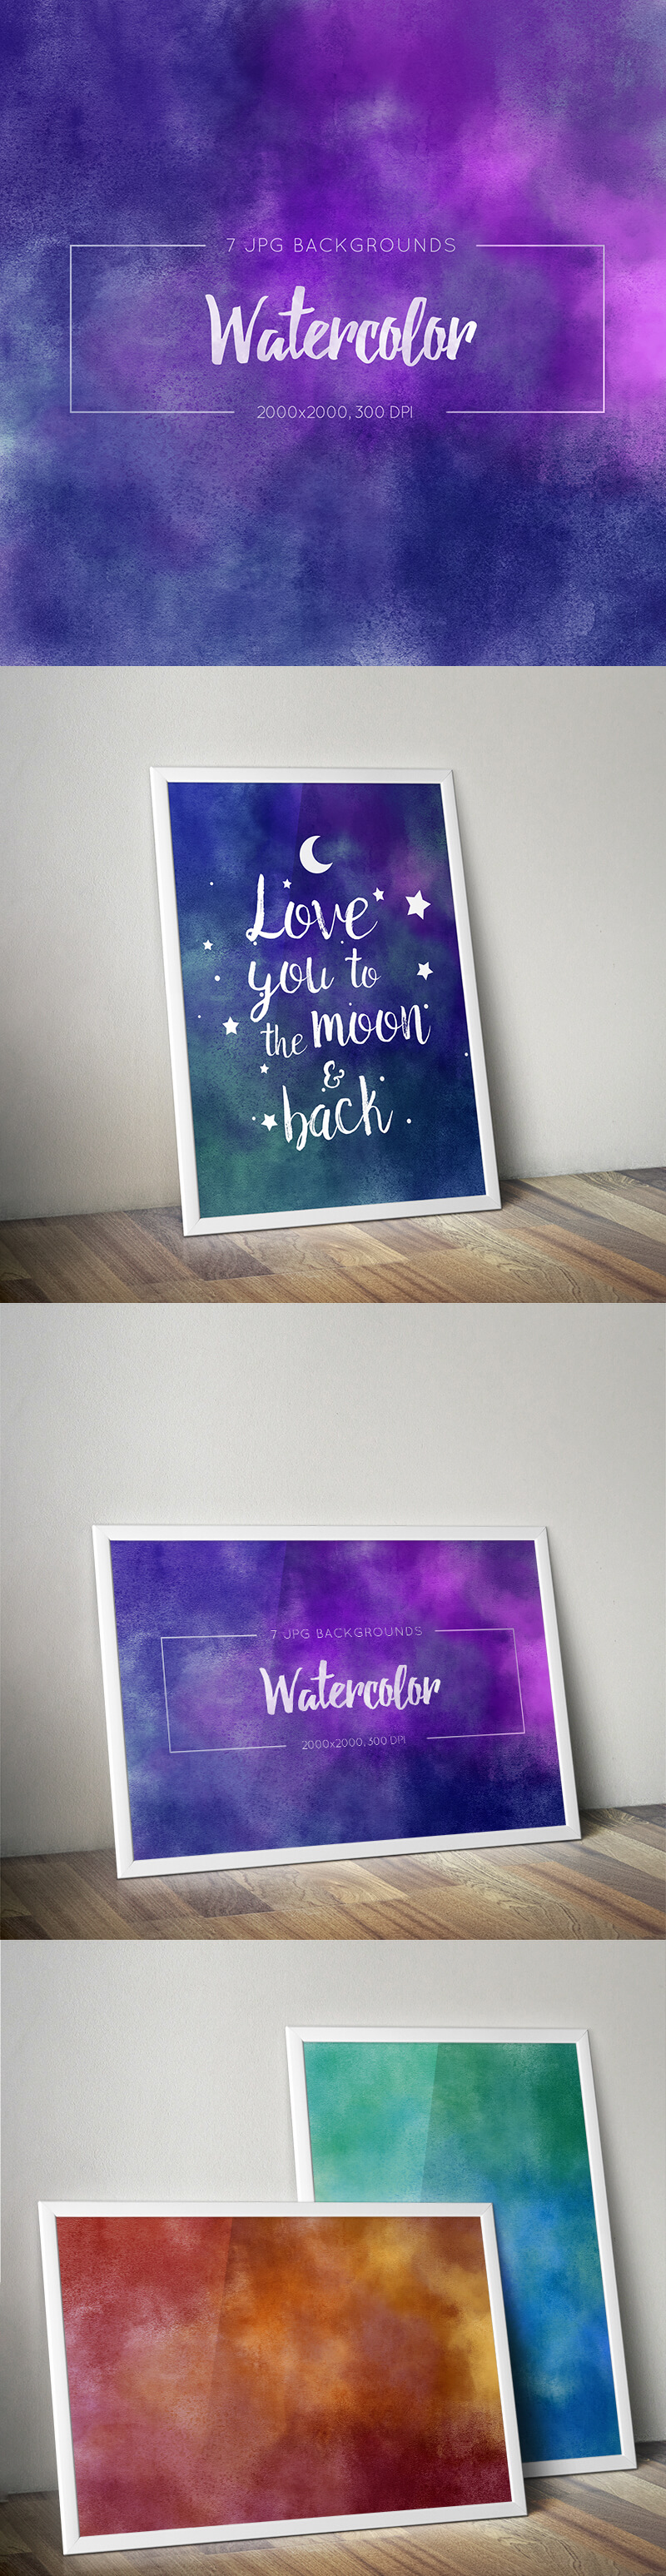 Watercolor Texture Backgrounds Preview